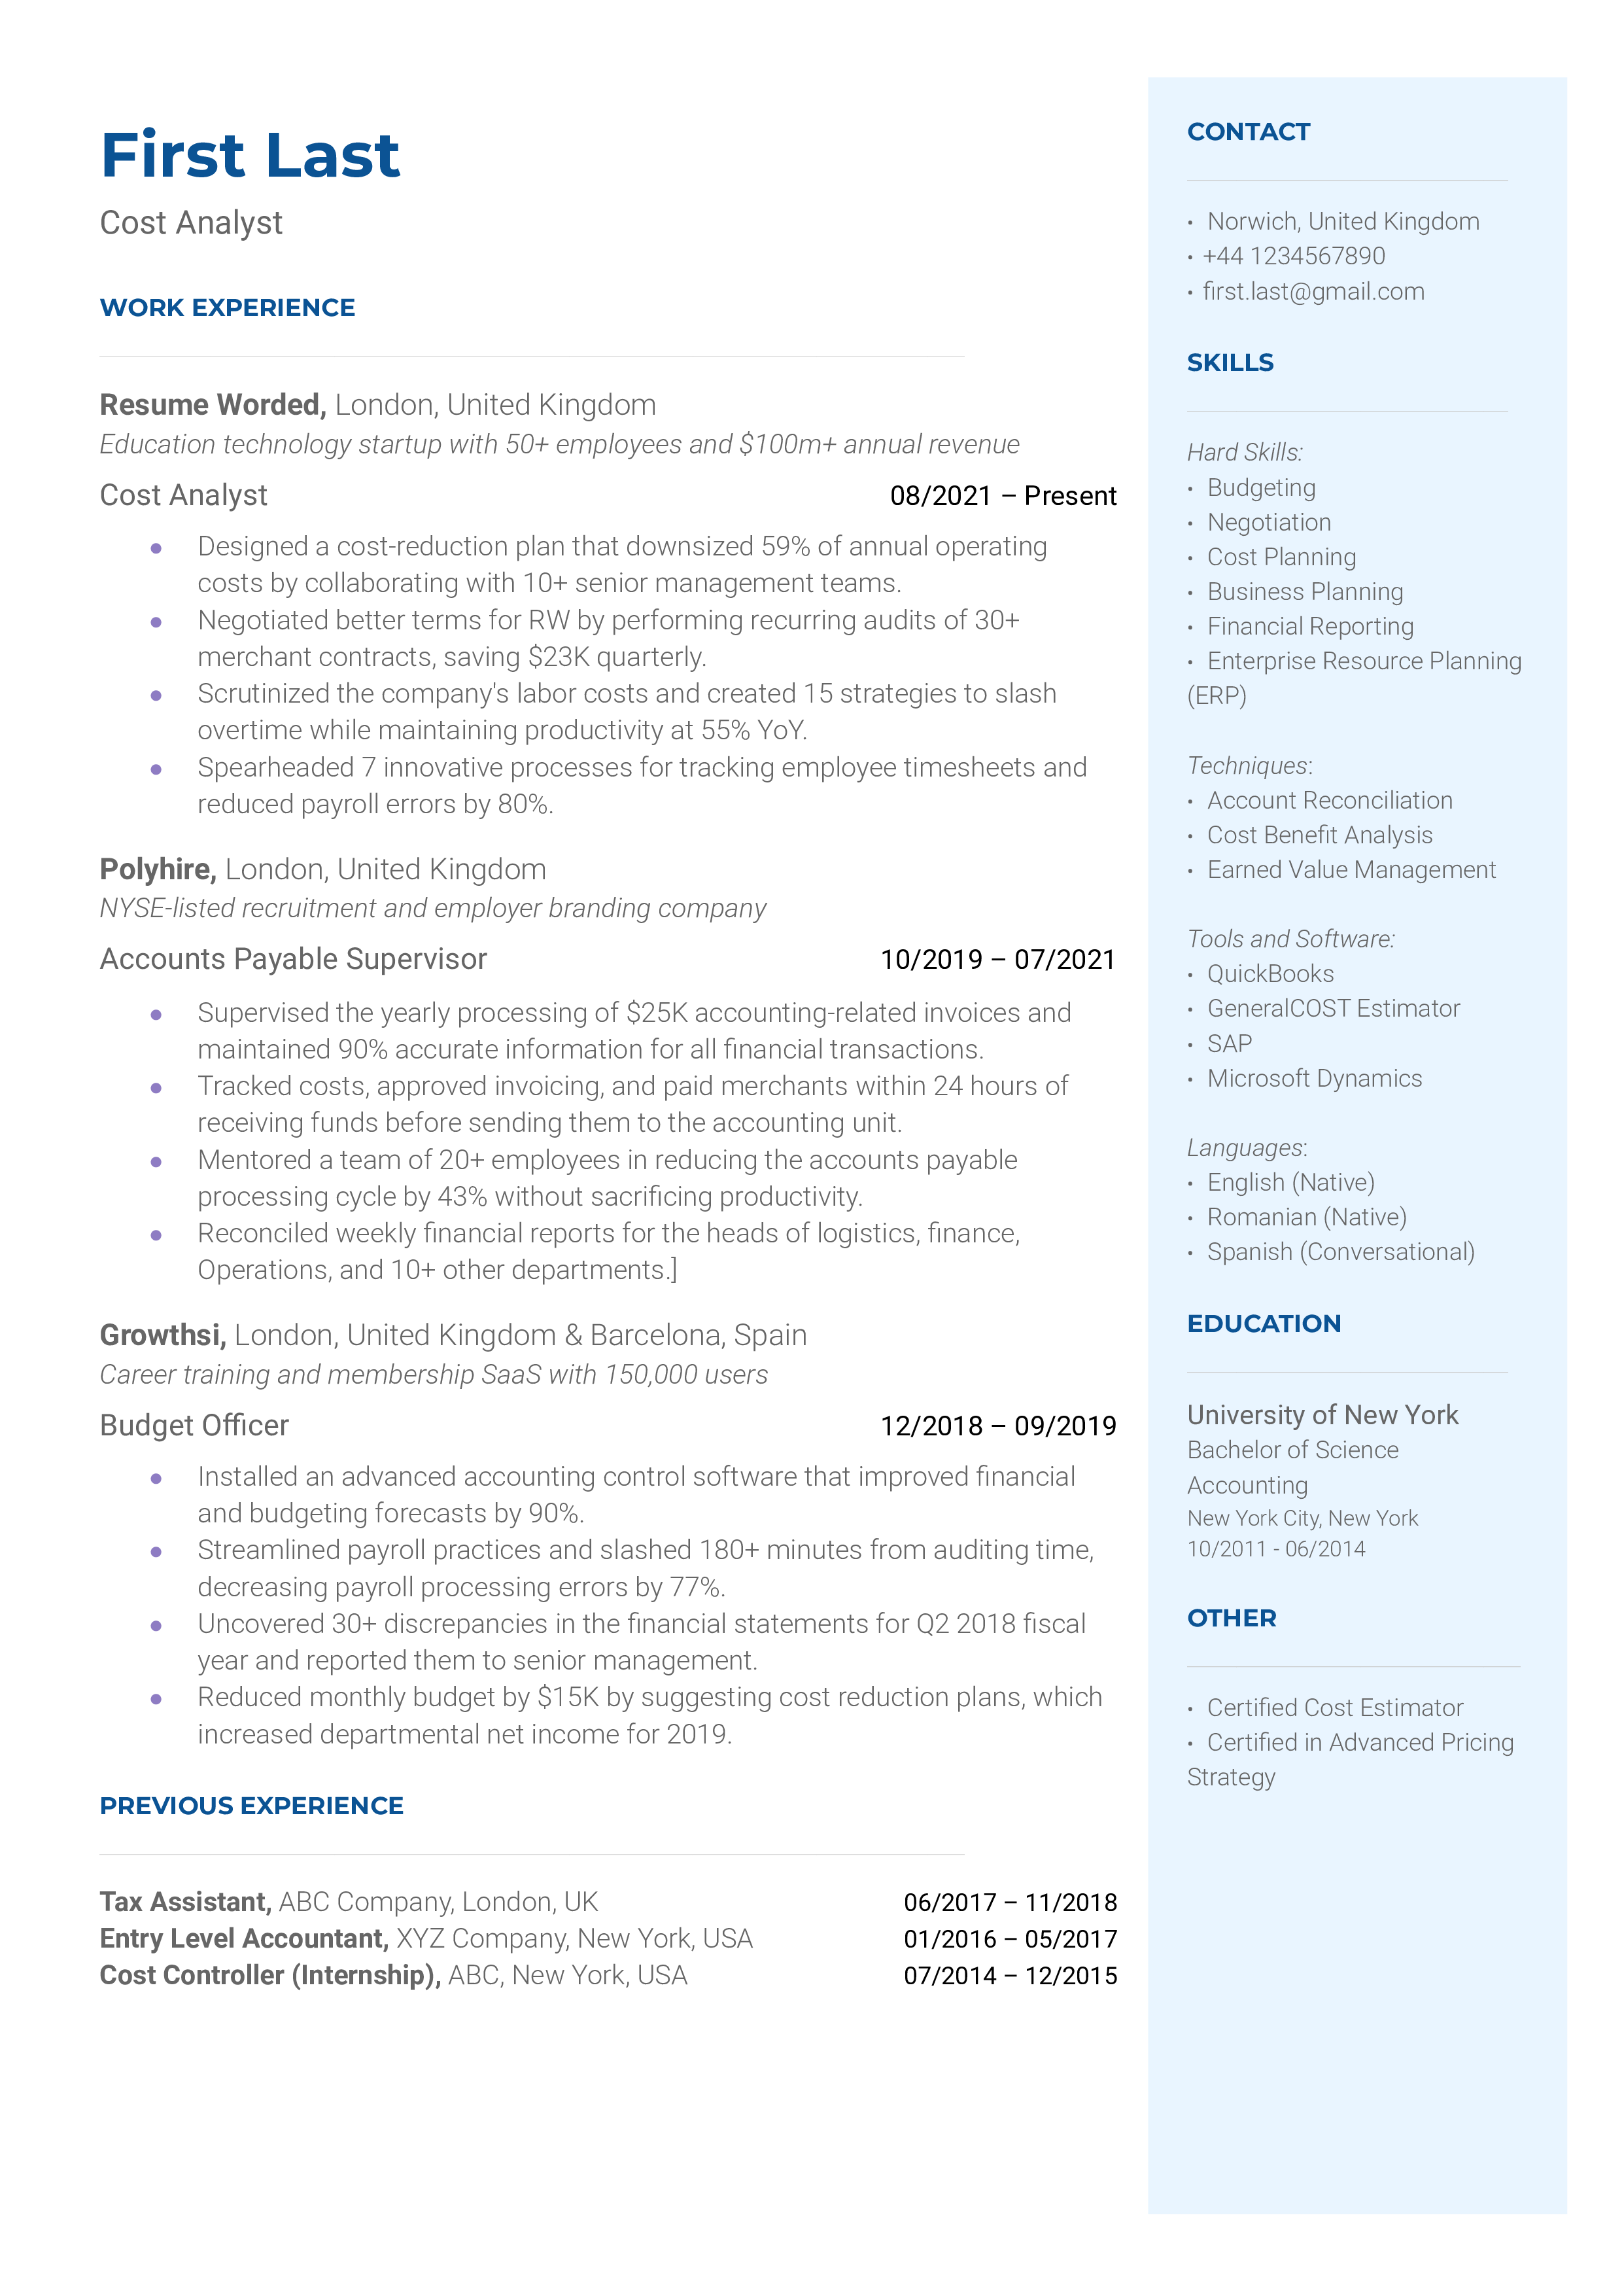 A cost analyst resume template highlighting relevant financial experience.